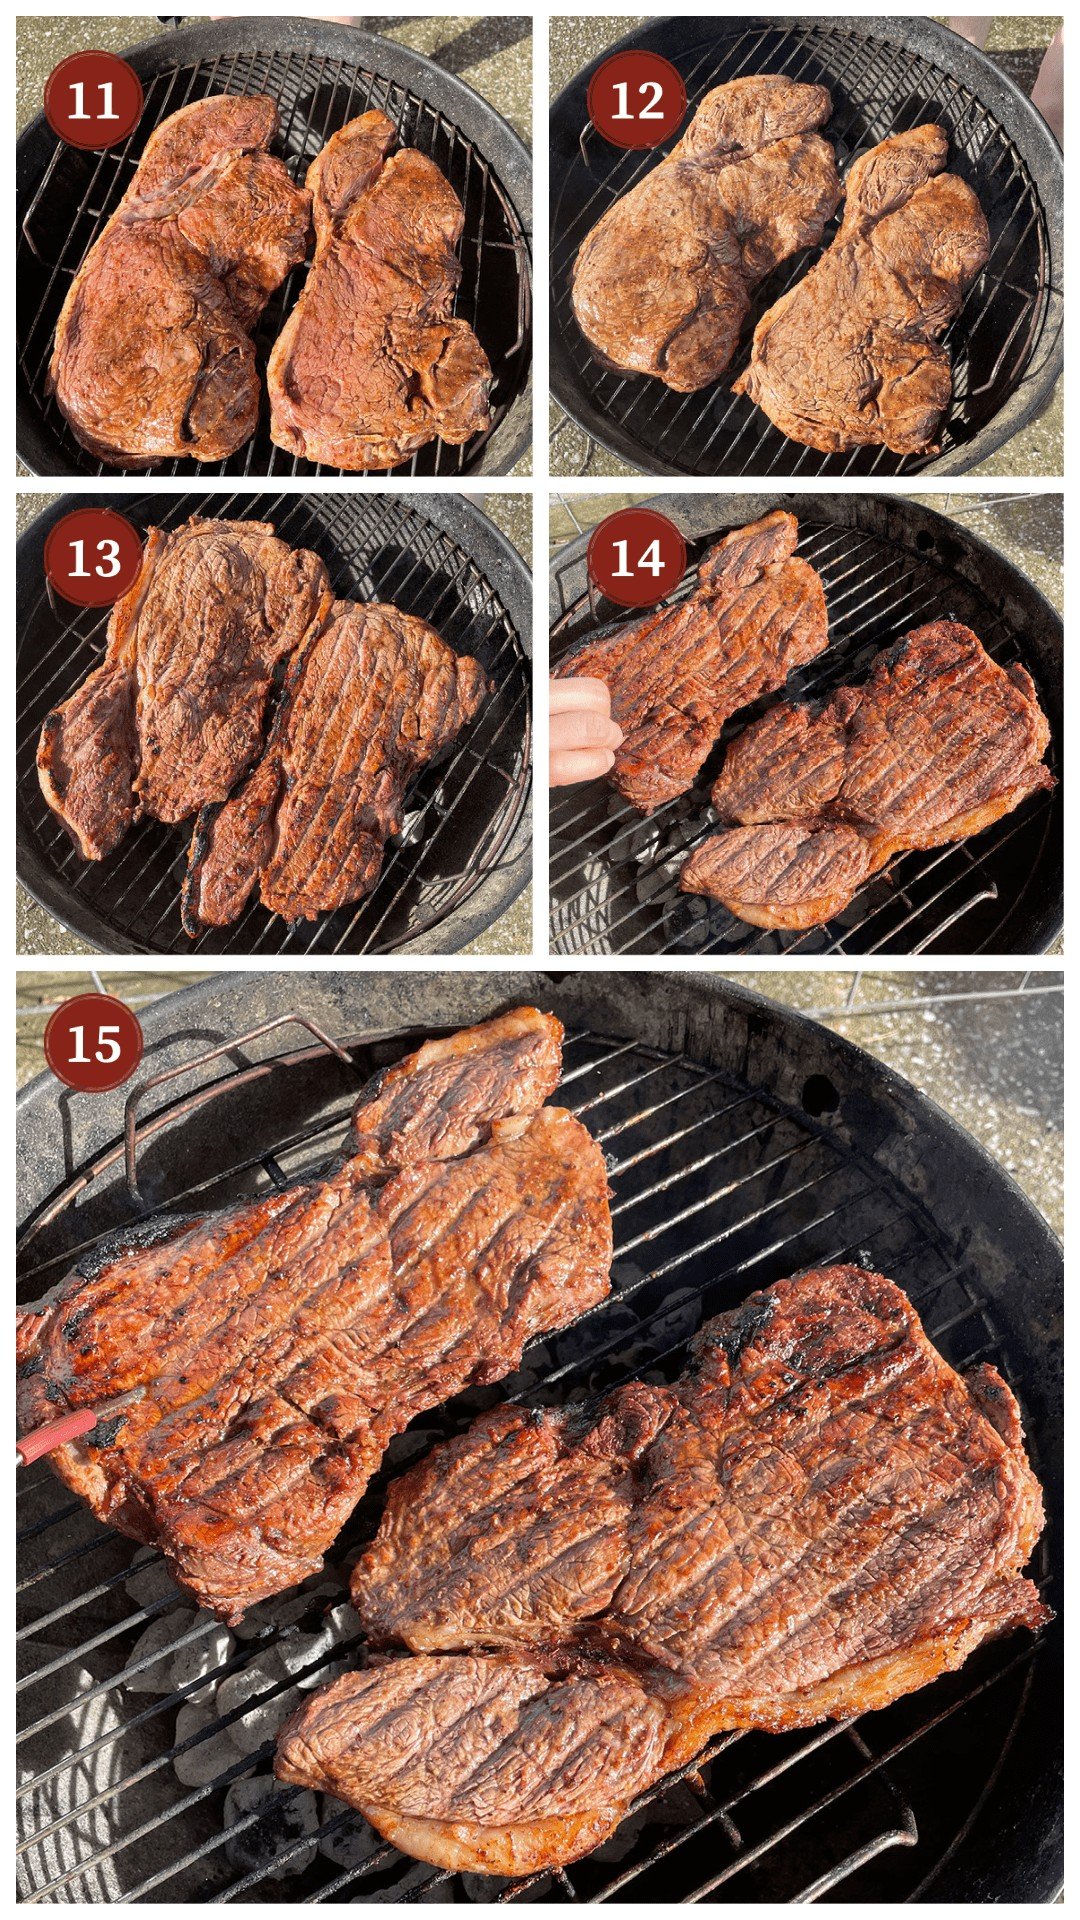 A collage of images showing how to make bourbon street steak, steps 11 - 15.